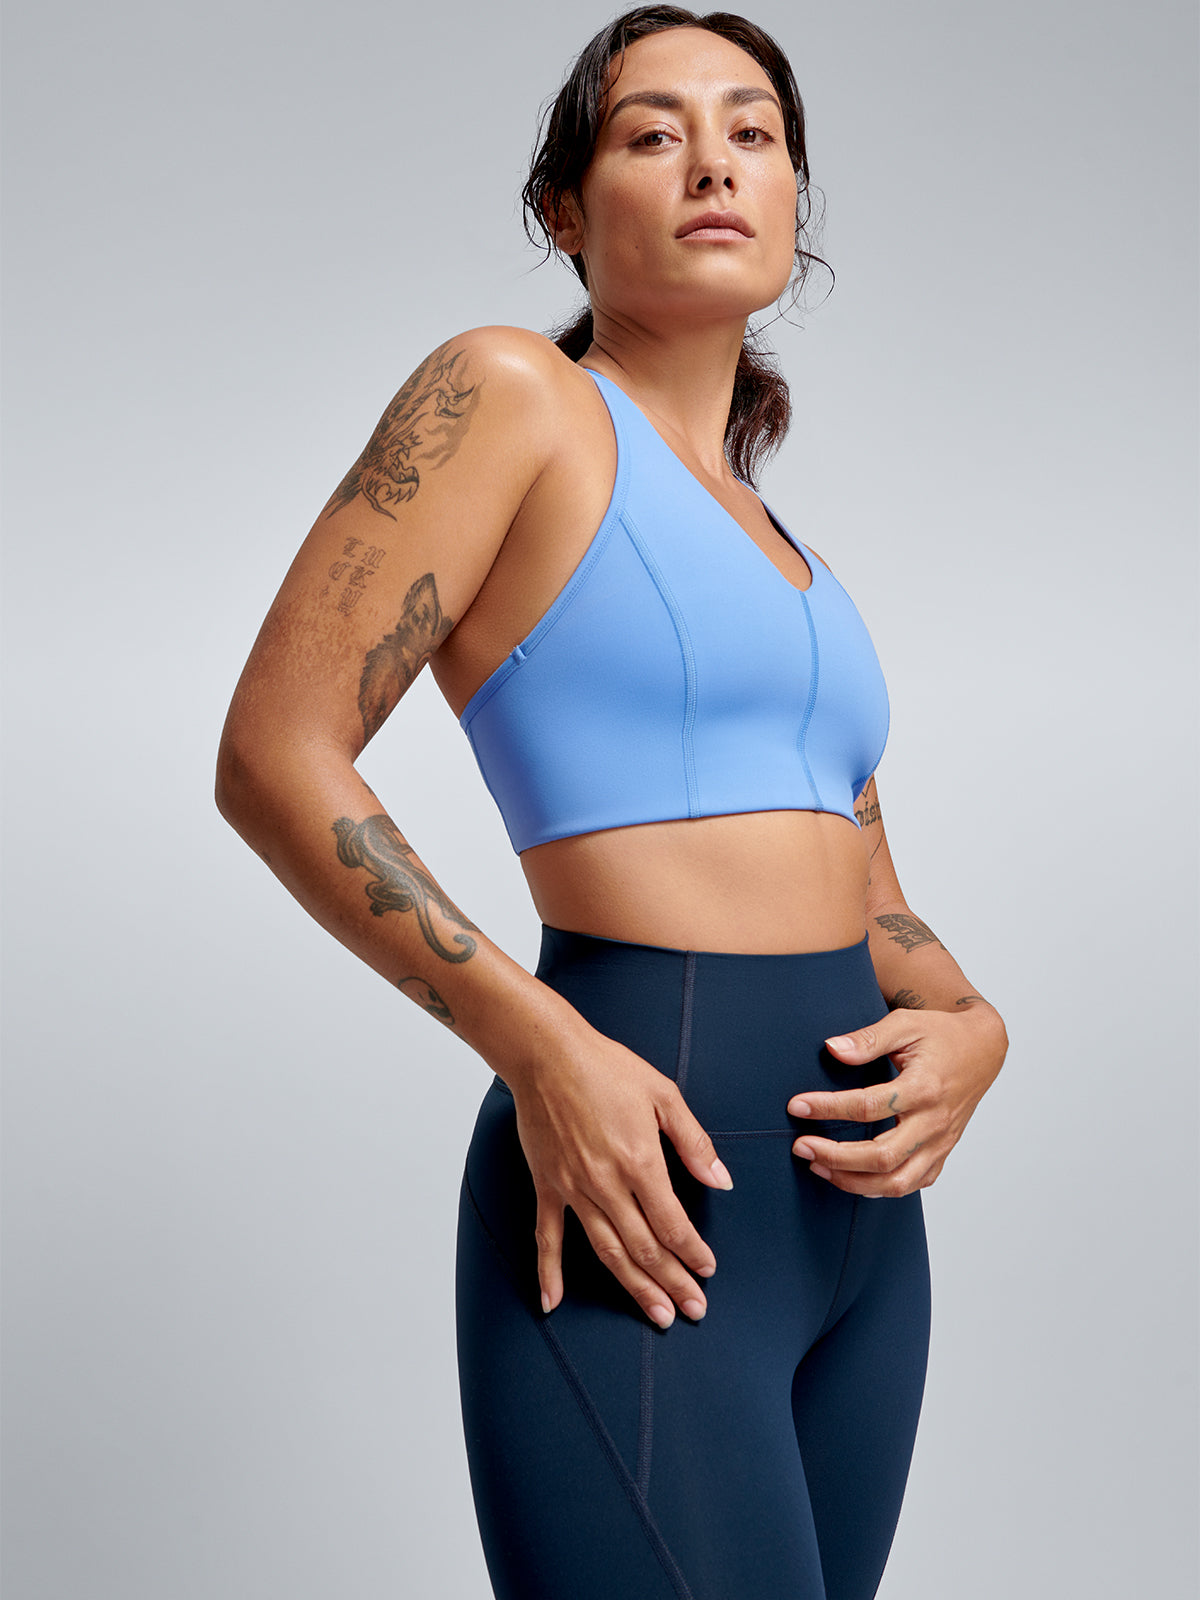 FEMME FATALE RECYCLED Sports Bra Vibrant Blue